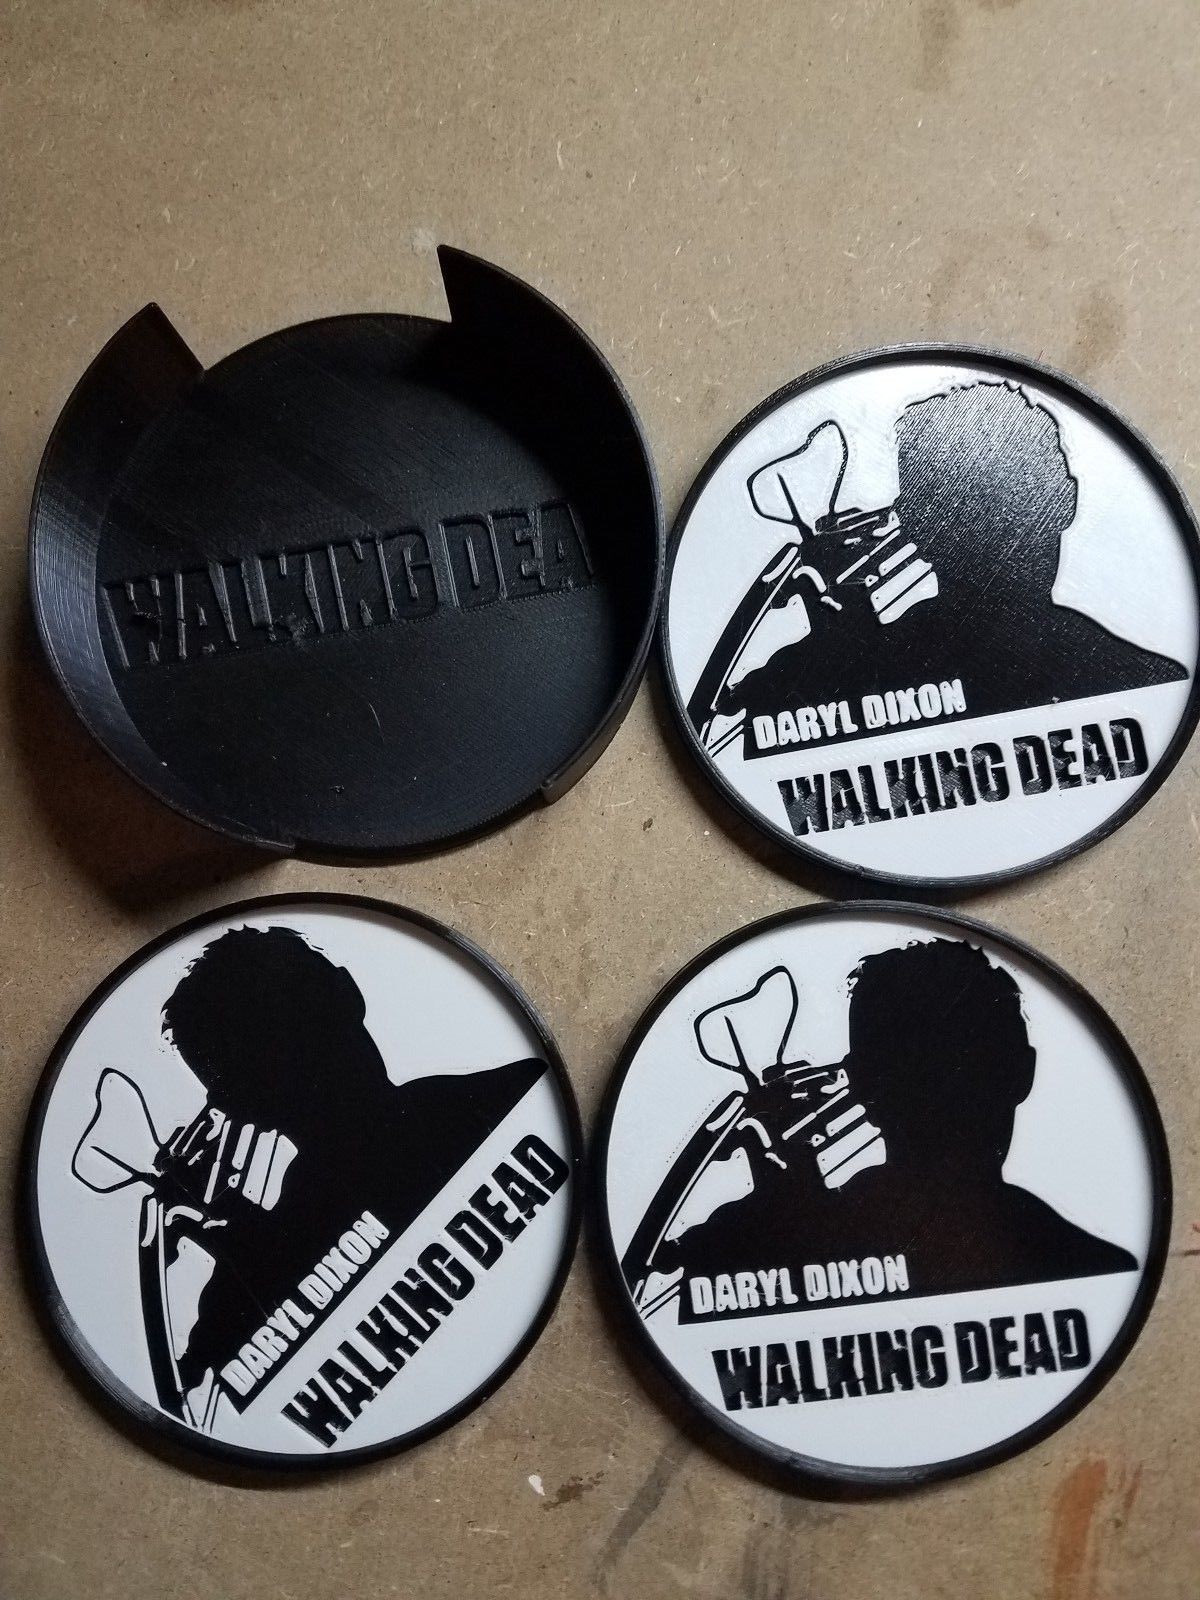 Daryl Dixon Walking Dead Coaster and Holder